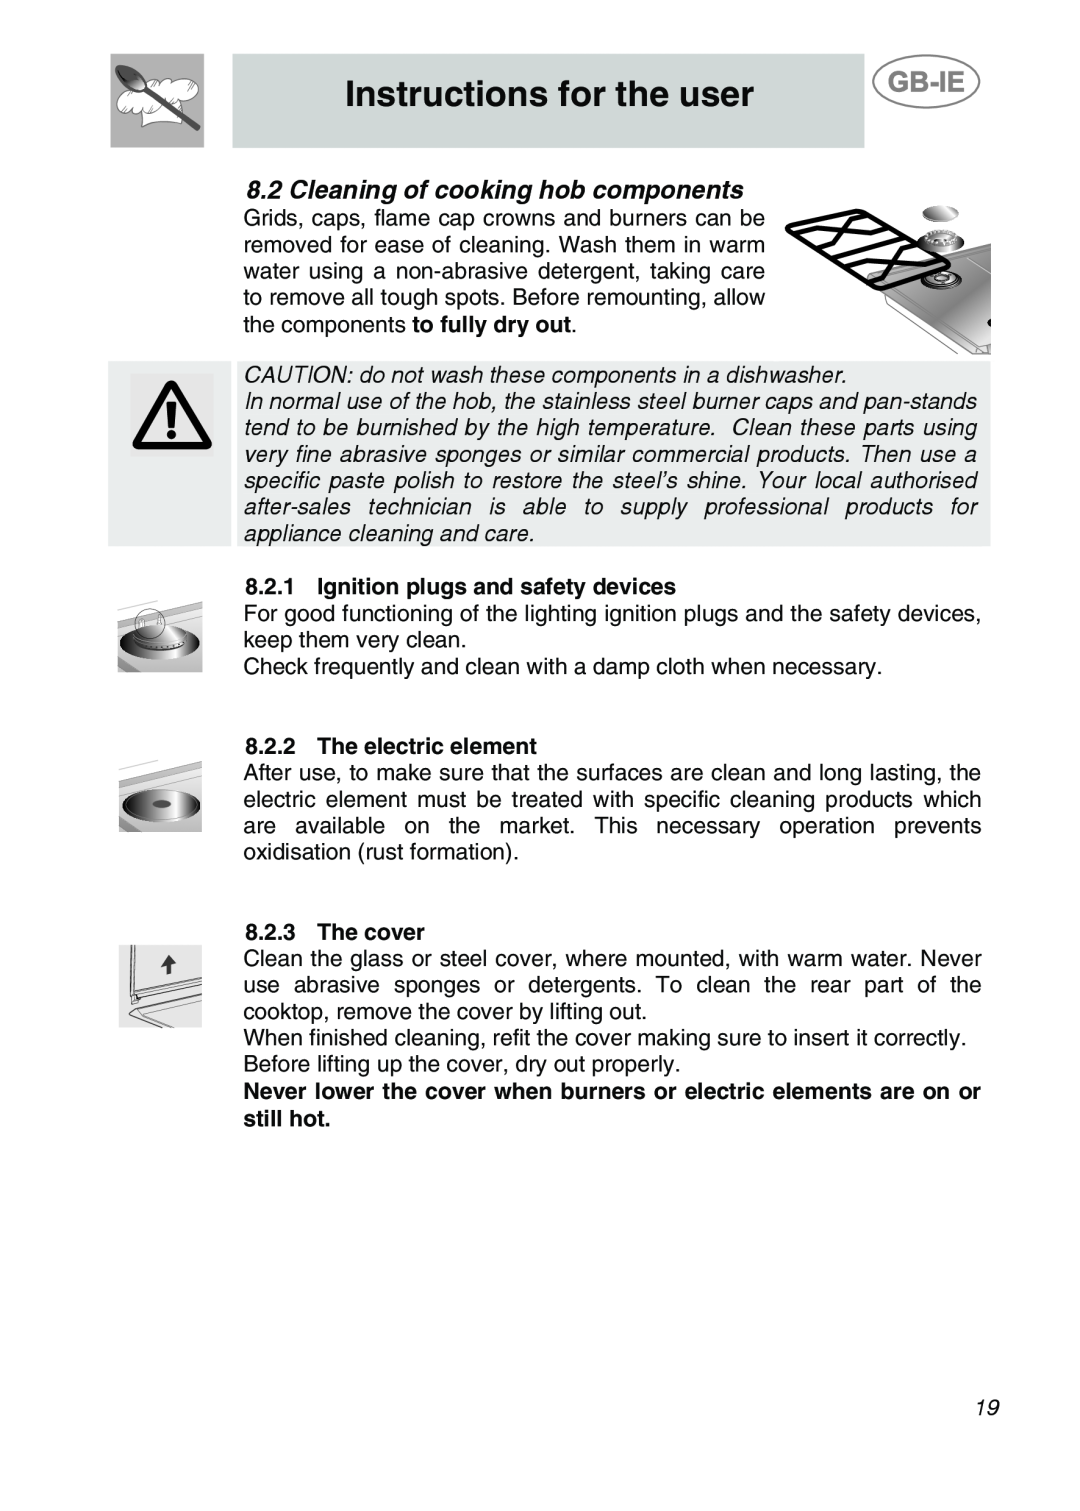 Smeg GCS90XG Cleaning of cooking hob components, Instructions for the user, Ignition plugs and safety devices, The cover 